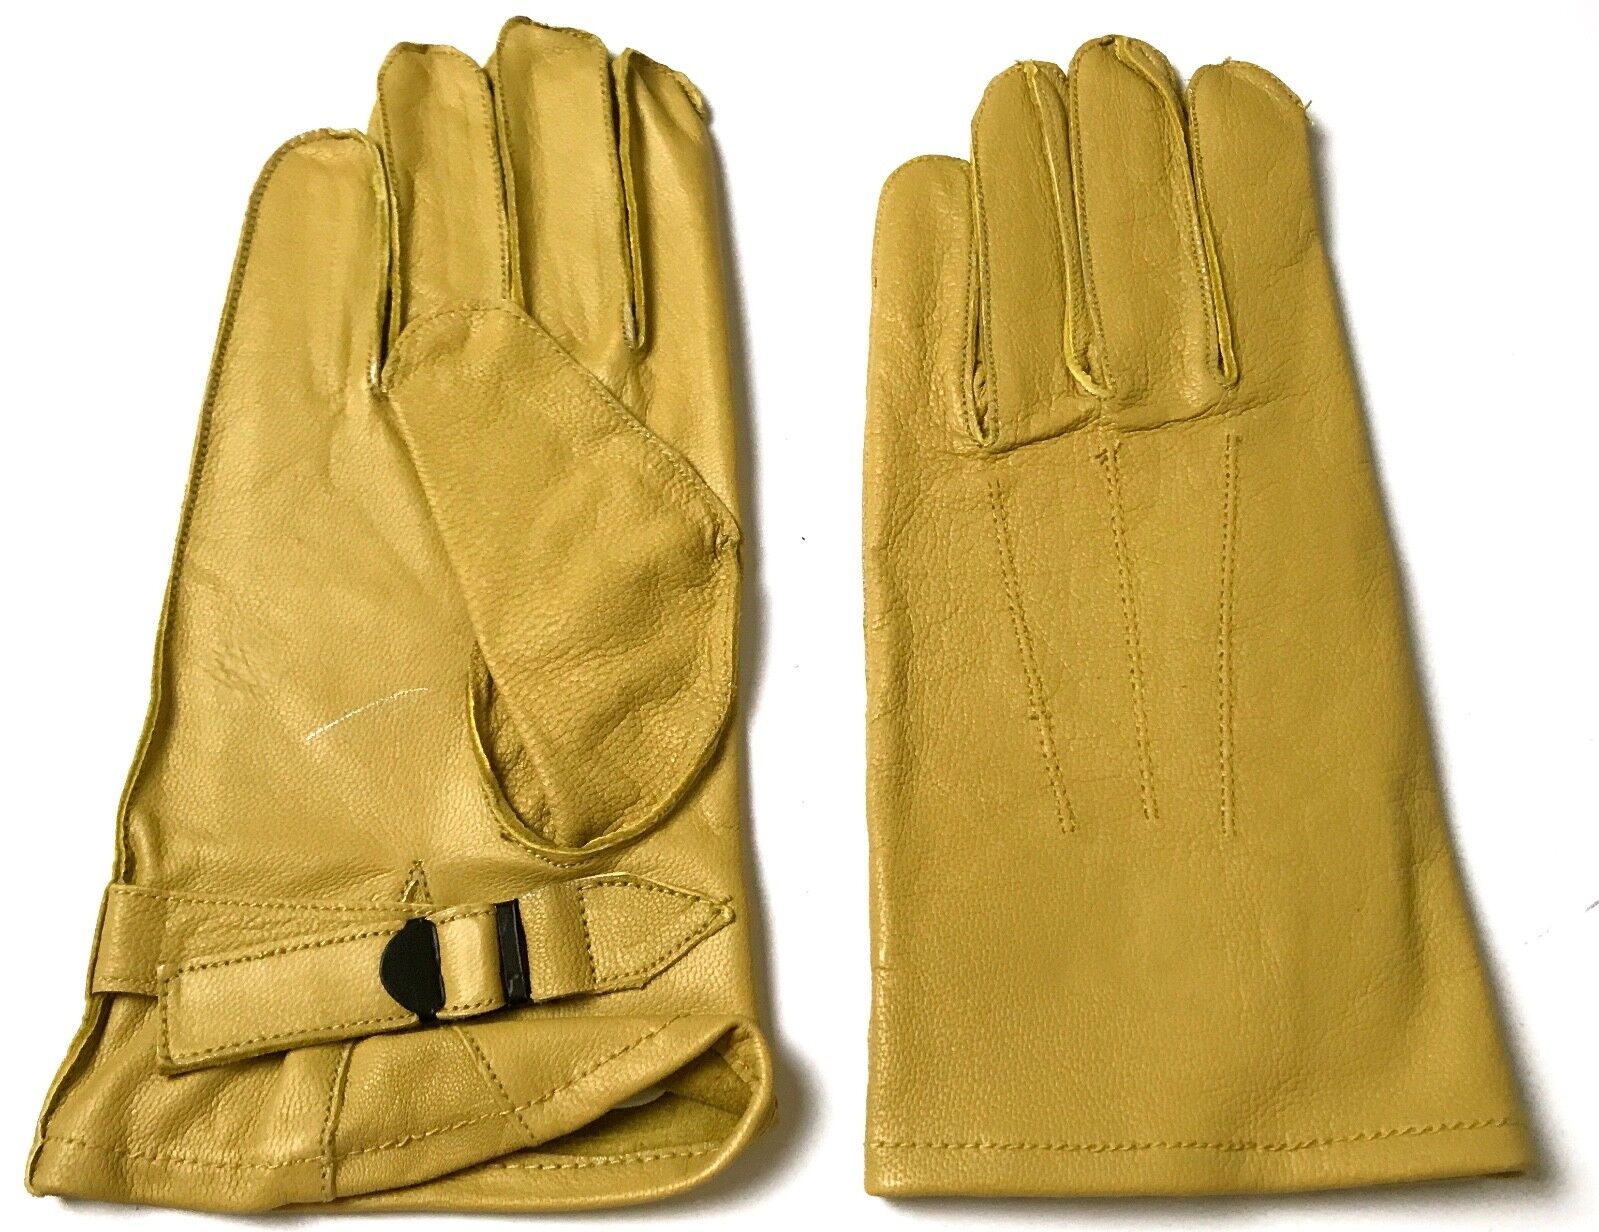  WWII US ARMY SHERMAN TANK TANKER LEATHER WORK GLOVES-SIZE XLARGE